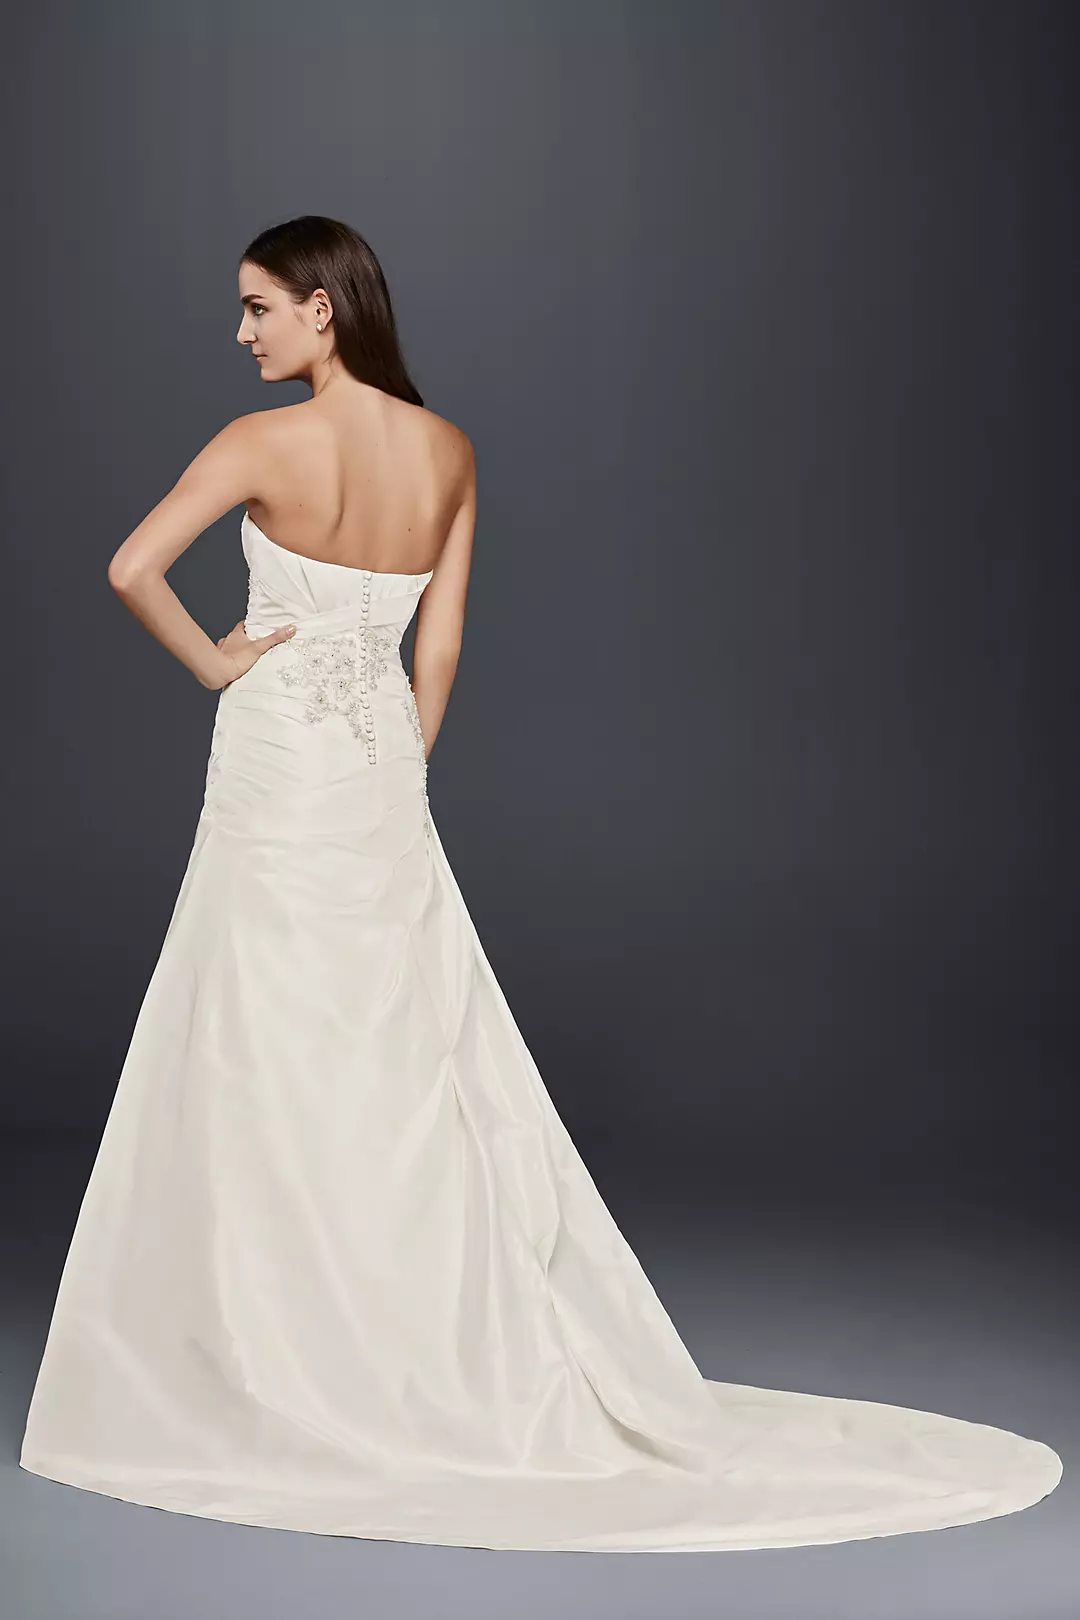 A-Line Wedding Dress with Ruching and Beading | David's Bridal